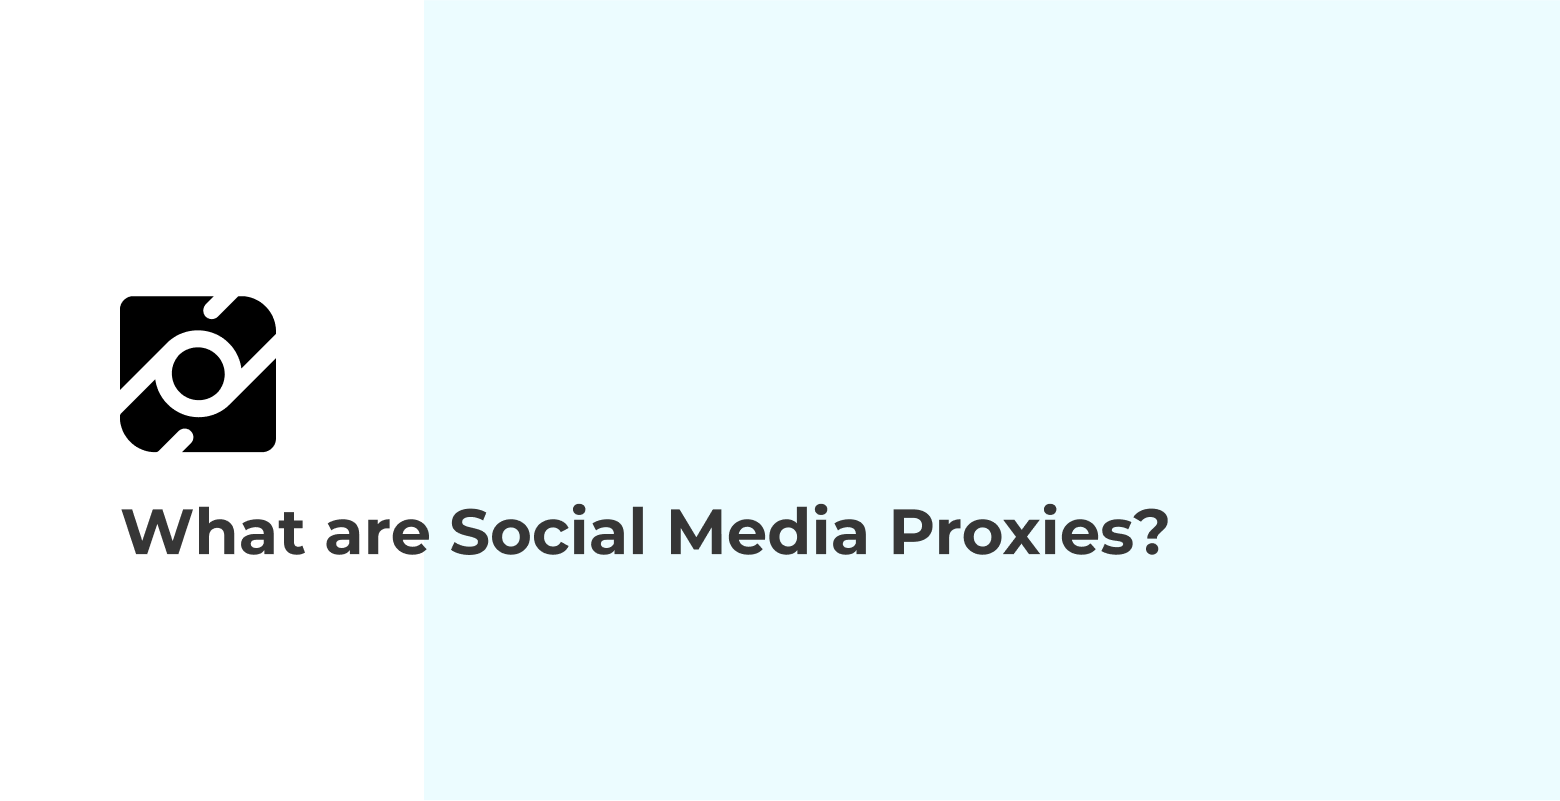 What are Social Media Proxies?